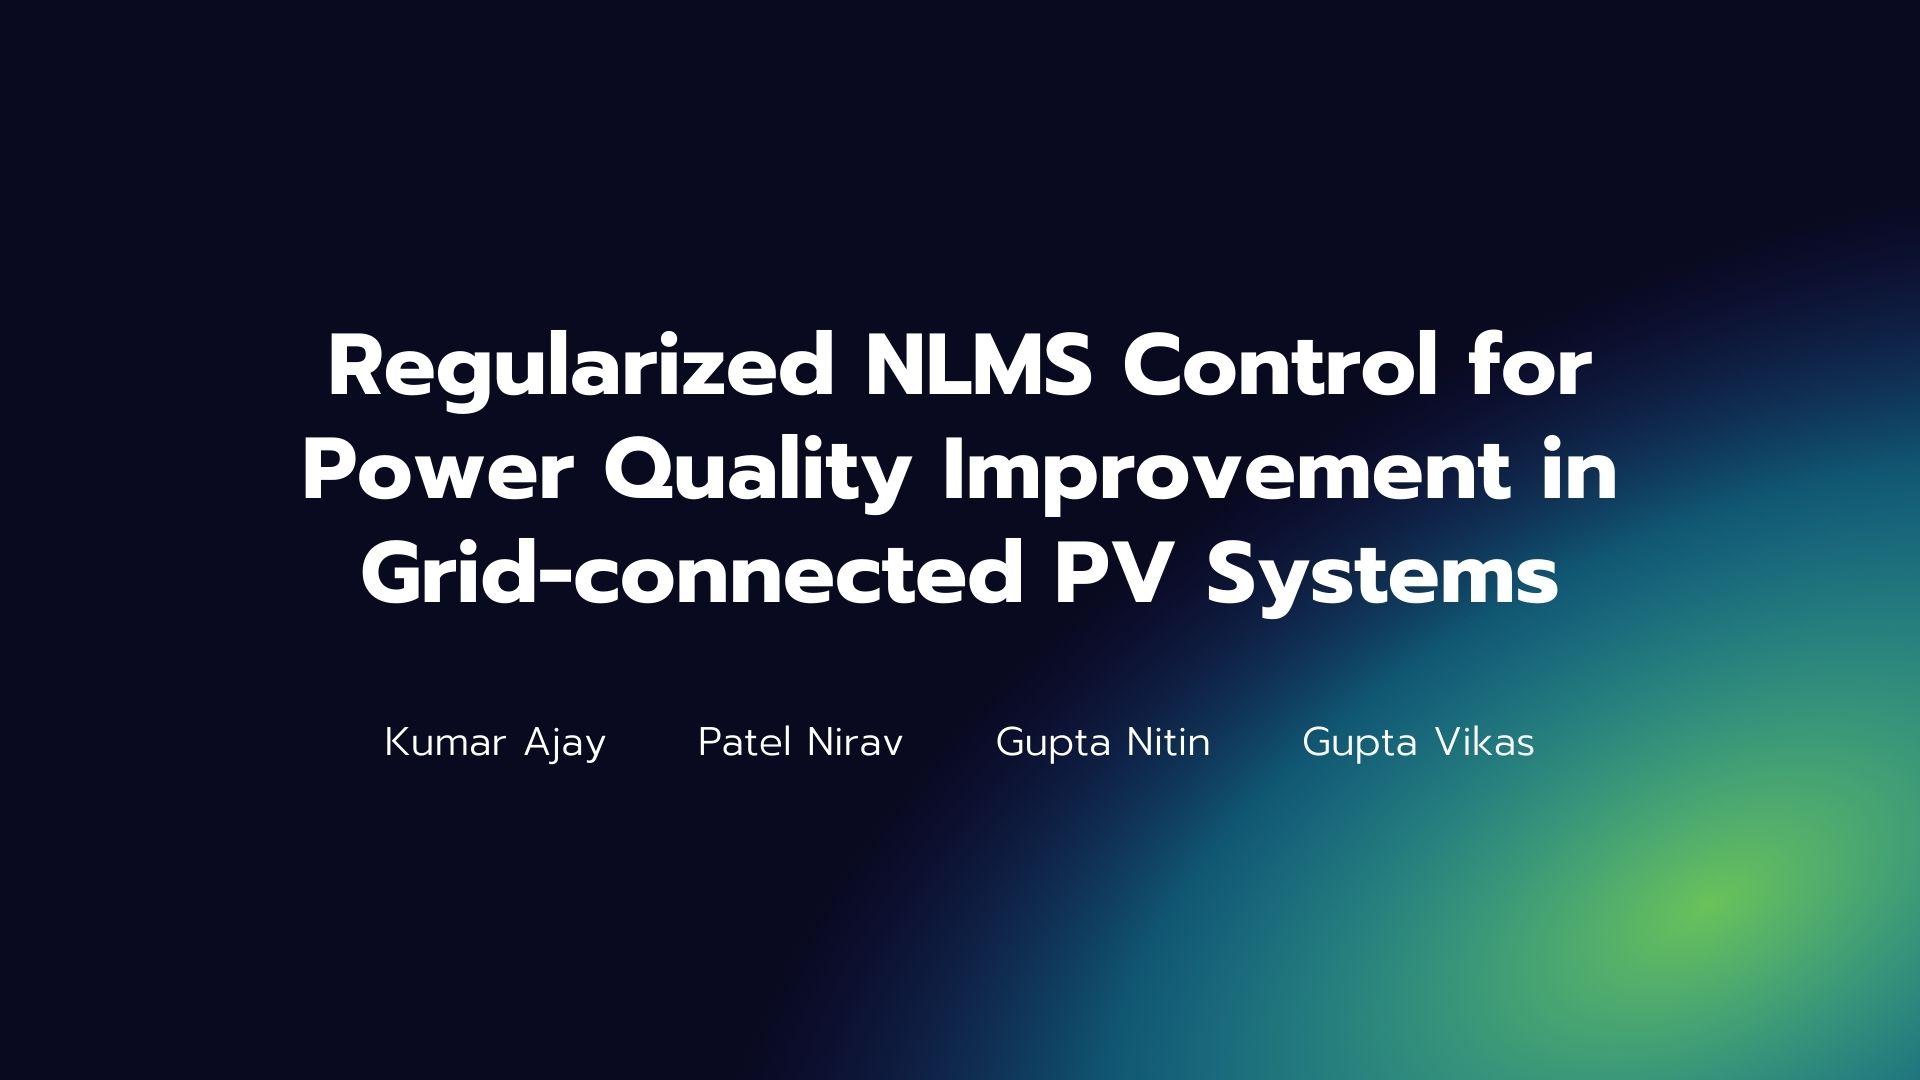 Regularized NLMS Control for Power Quality Improvement in Grid-connected PV Systems